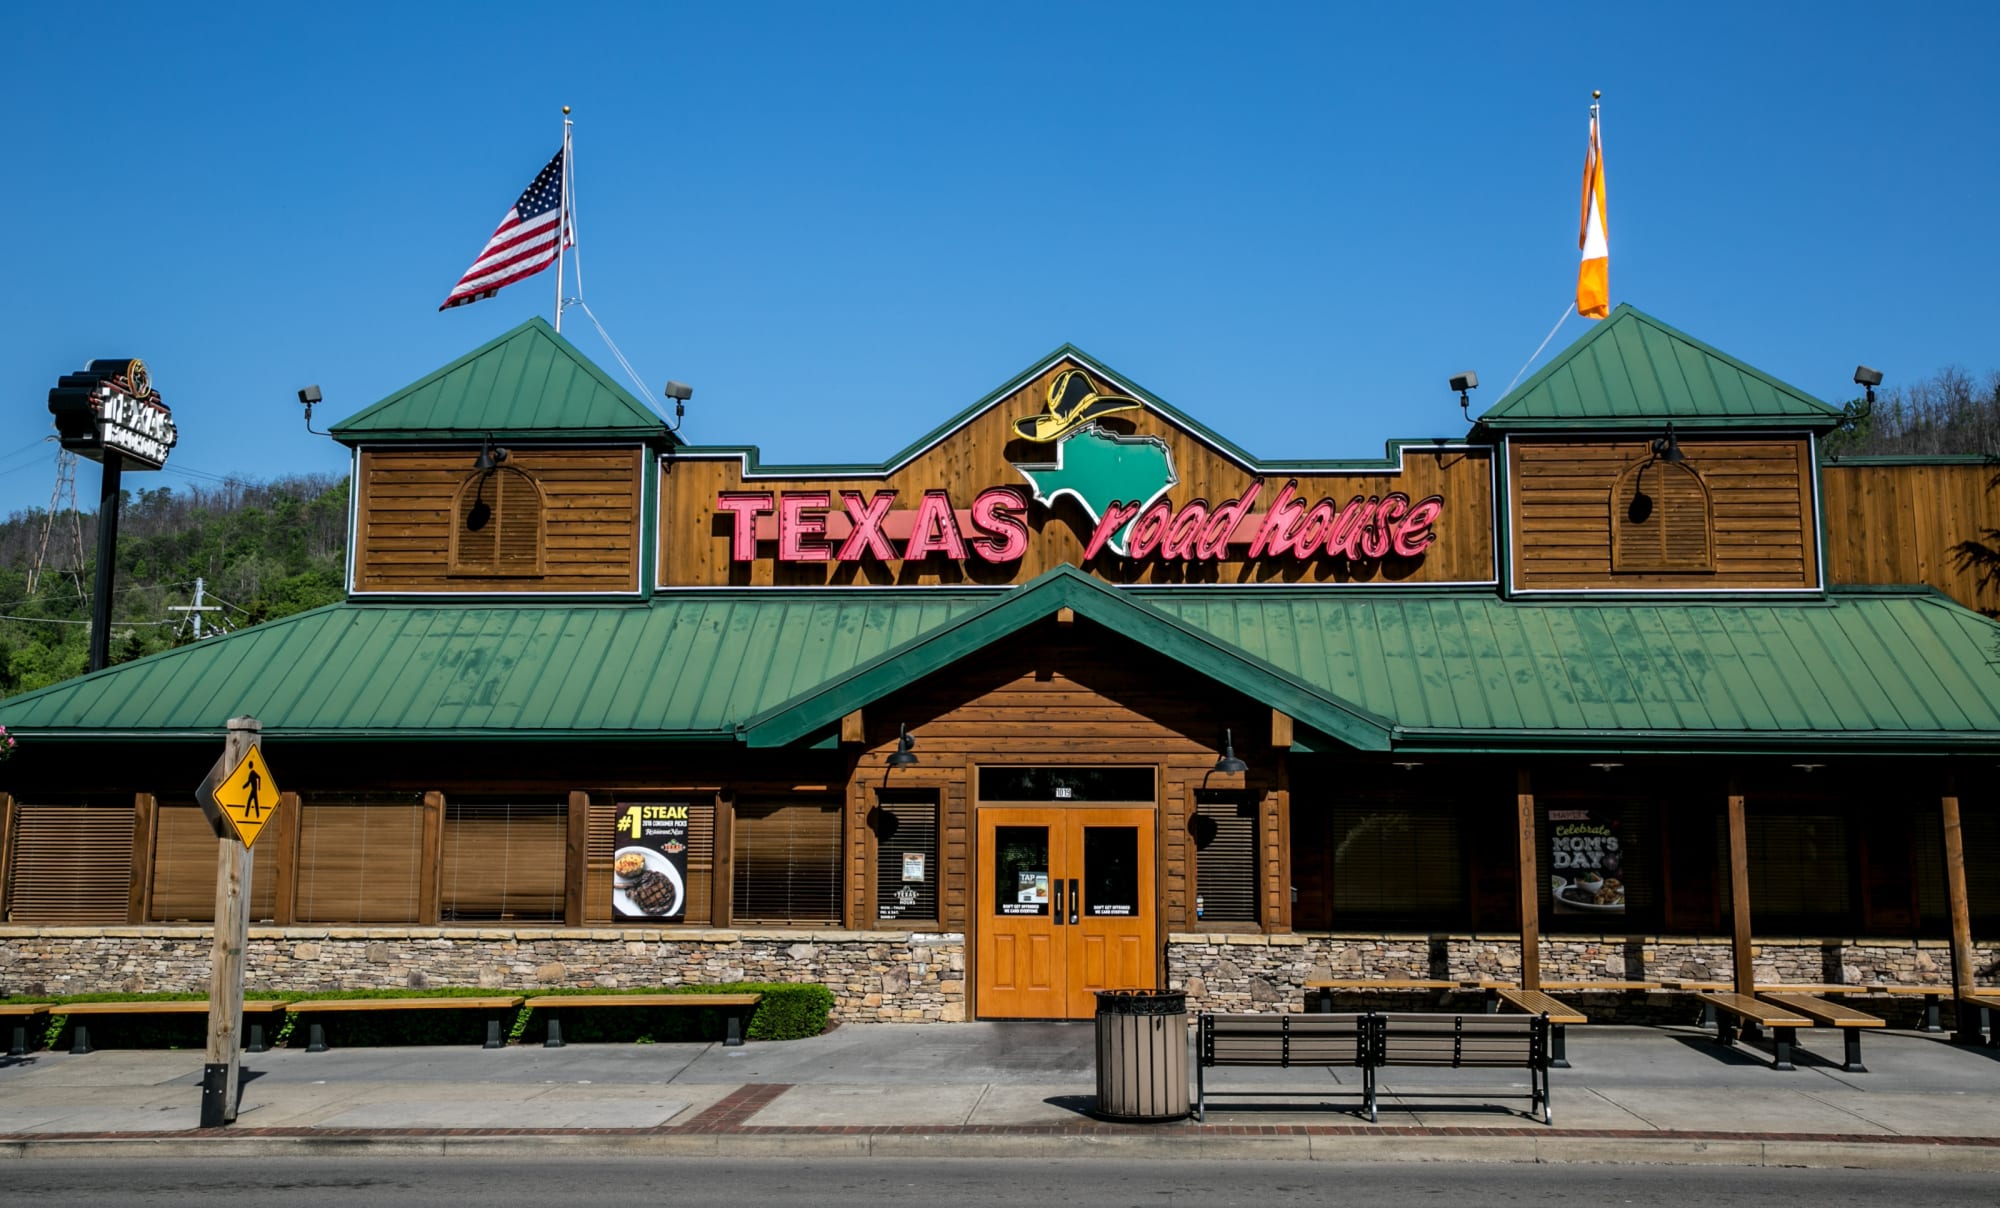 Is the Texas Roadhouse open on Christmas? Answering the question...